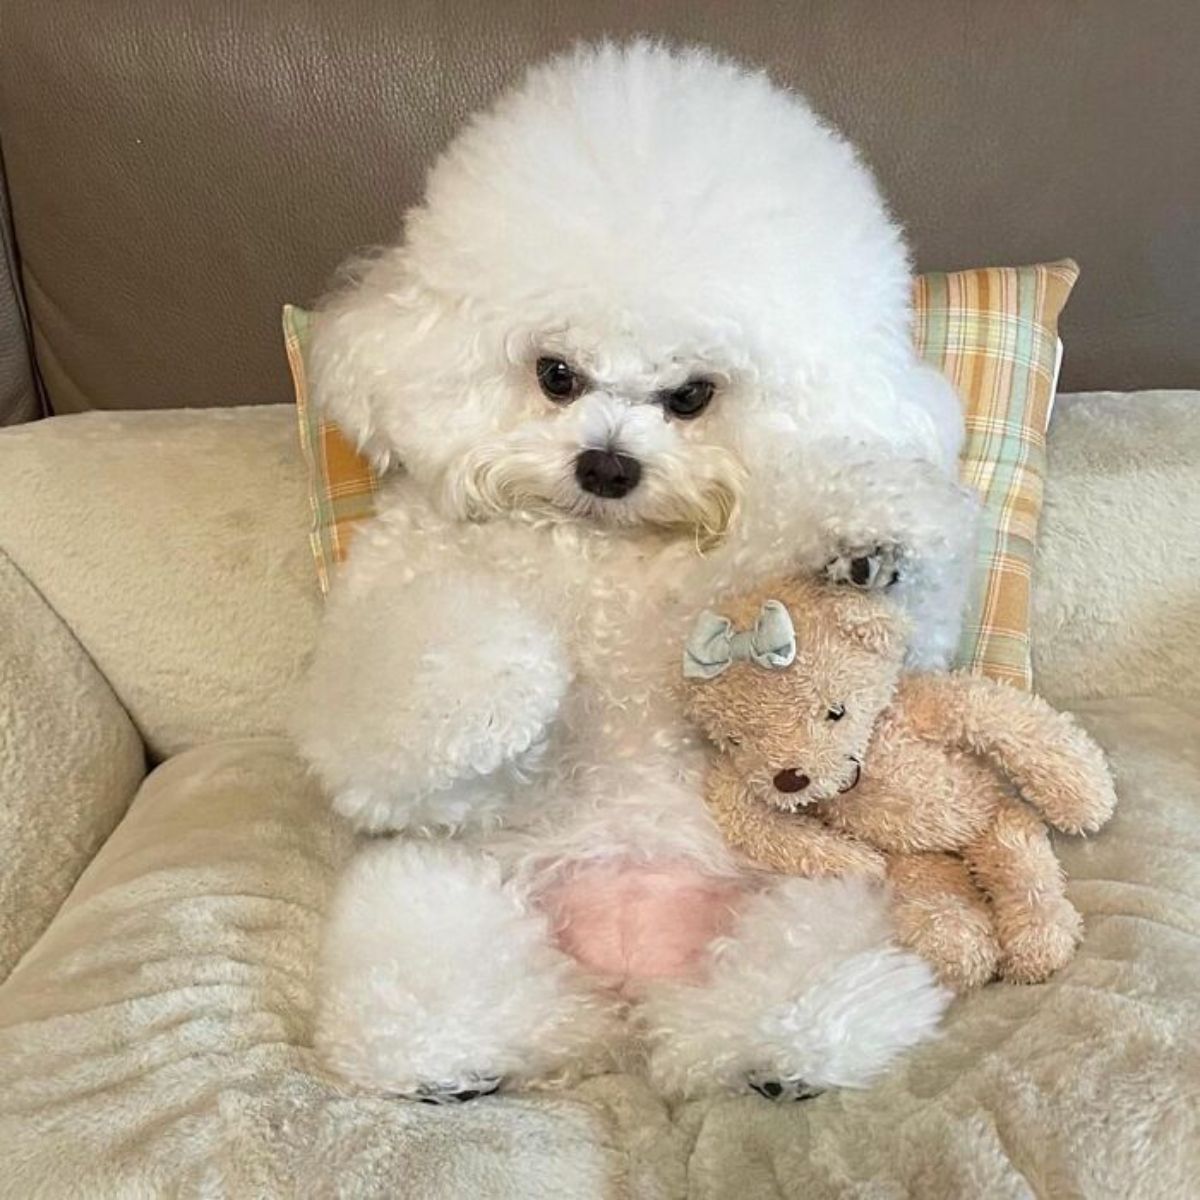 small fluffy white dog laying back against a cushion on a beige dog bed cuddling a brown teddy bear and looking angry